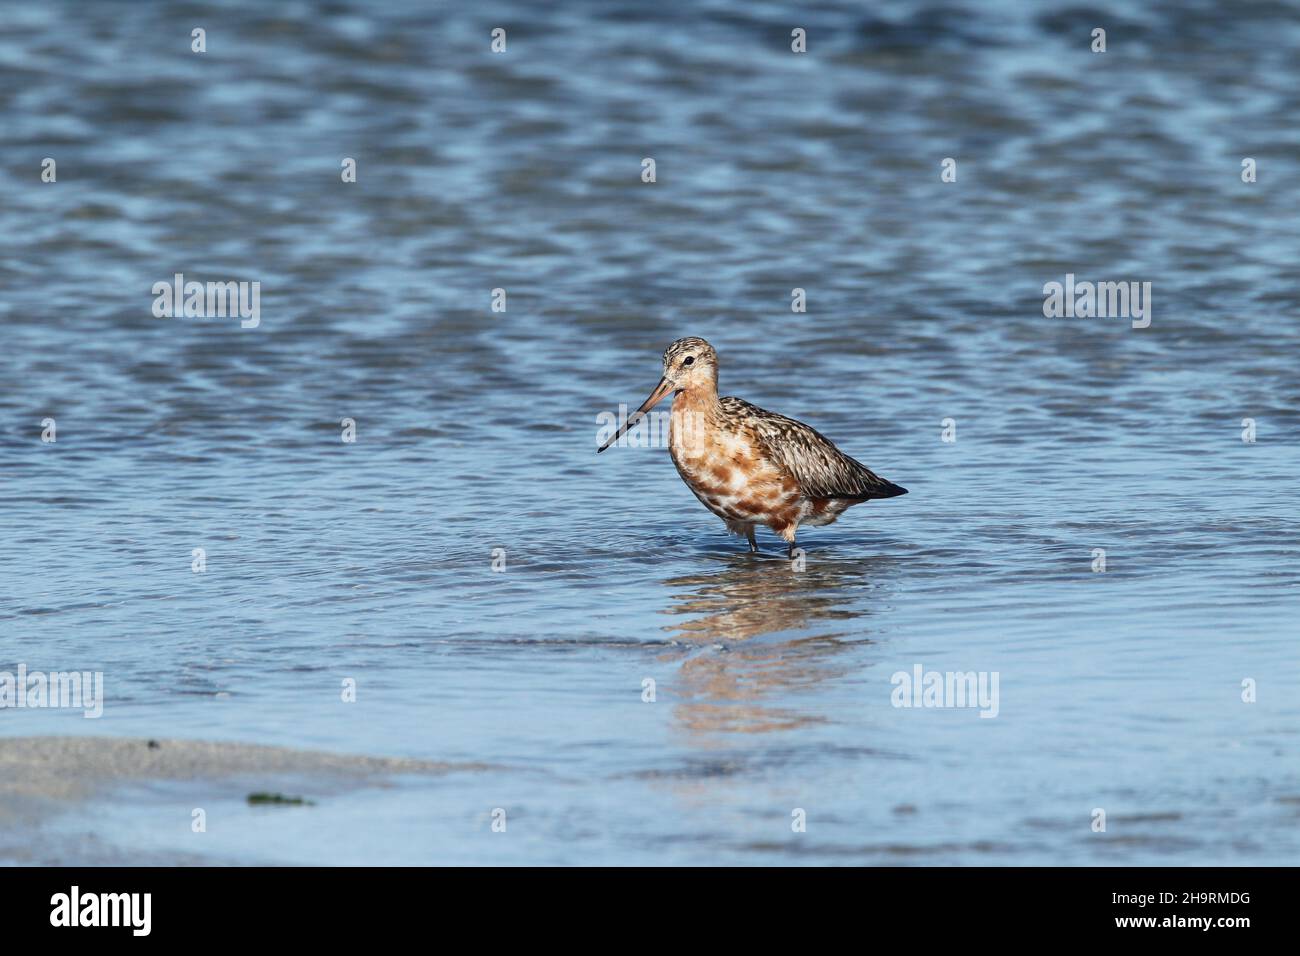 Bar tailed godwit, a migratory species breeding in the Tundra + Iceland. This may be an early returning bird as it is not in full plumage. Stock Photo